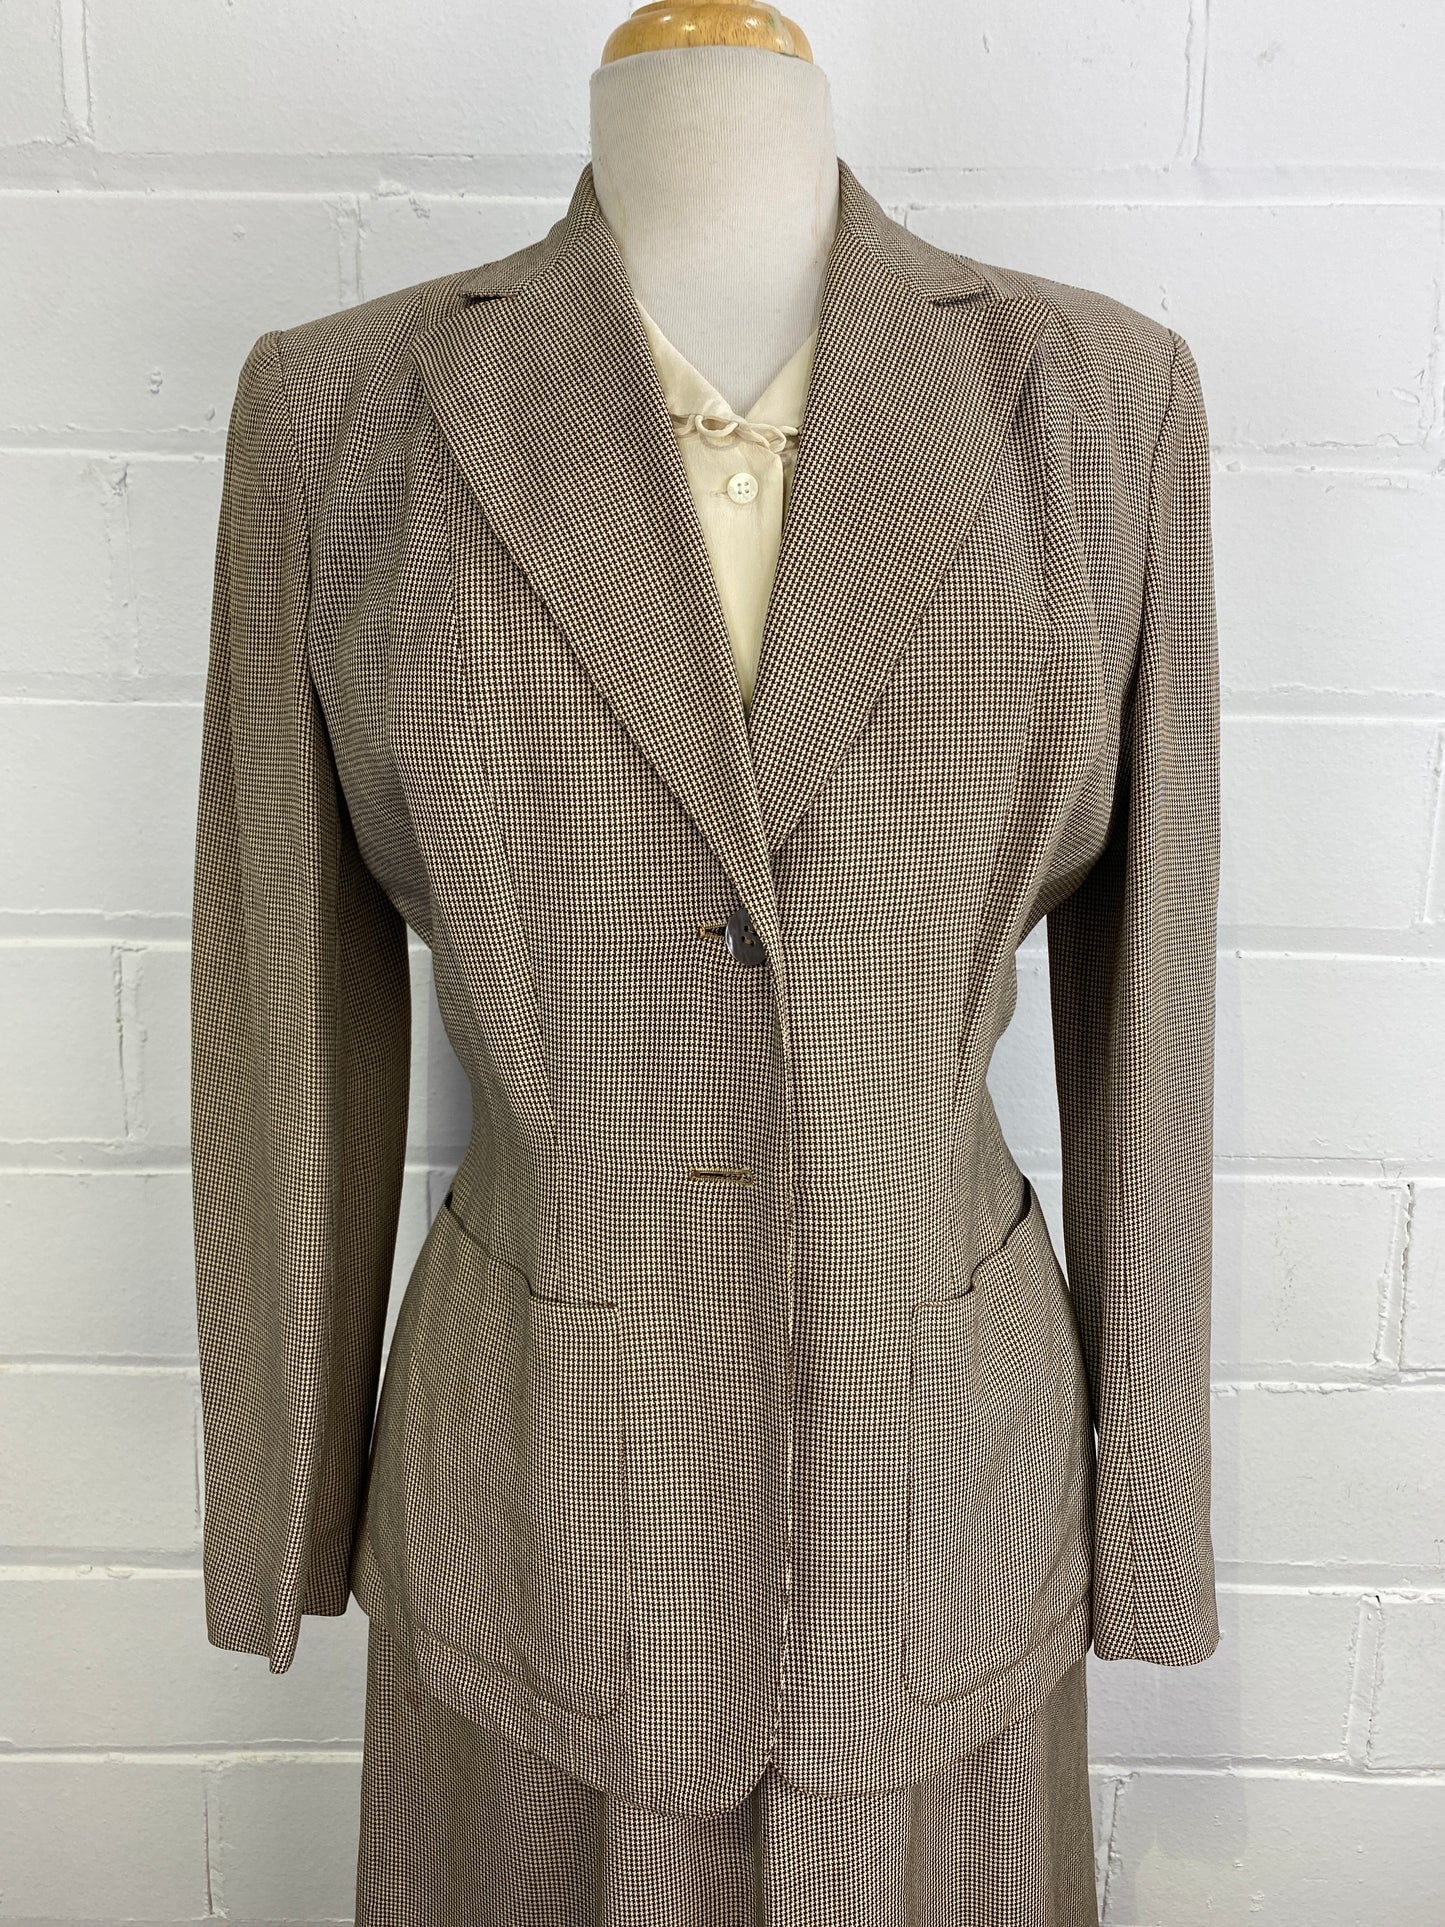 Vintage 1940s Brown Houndstooth Two-Piece Skirt Suit, Medium 